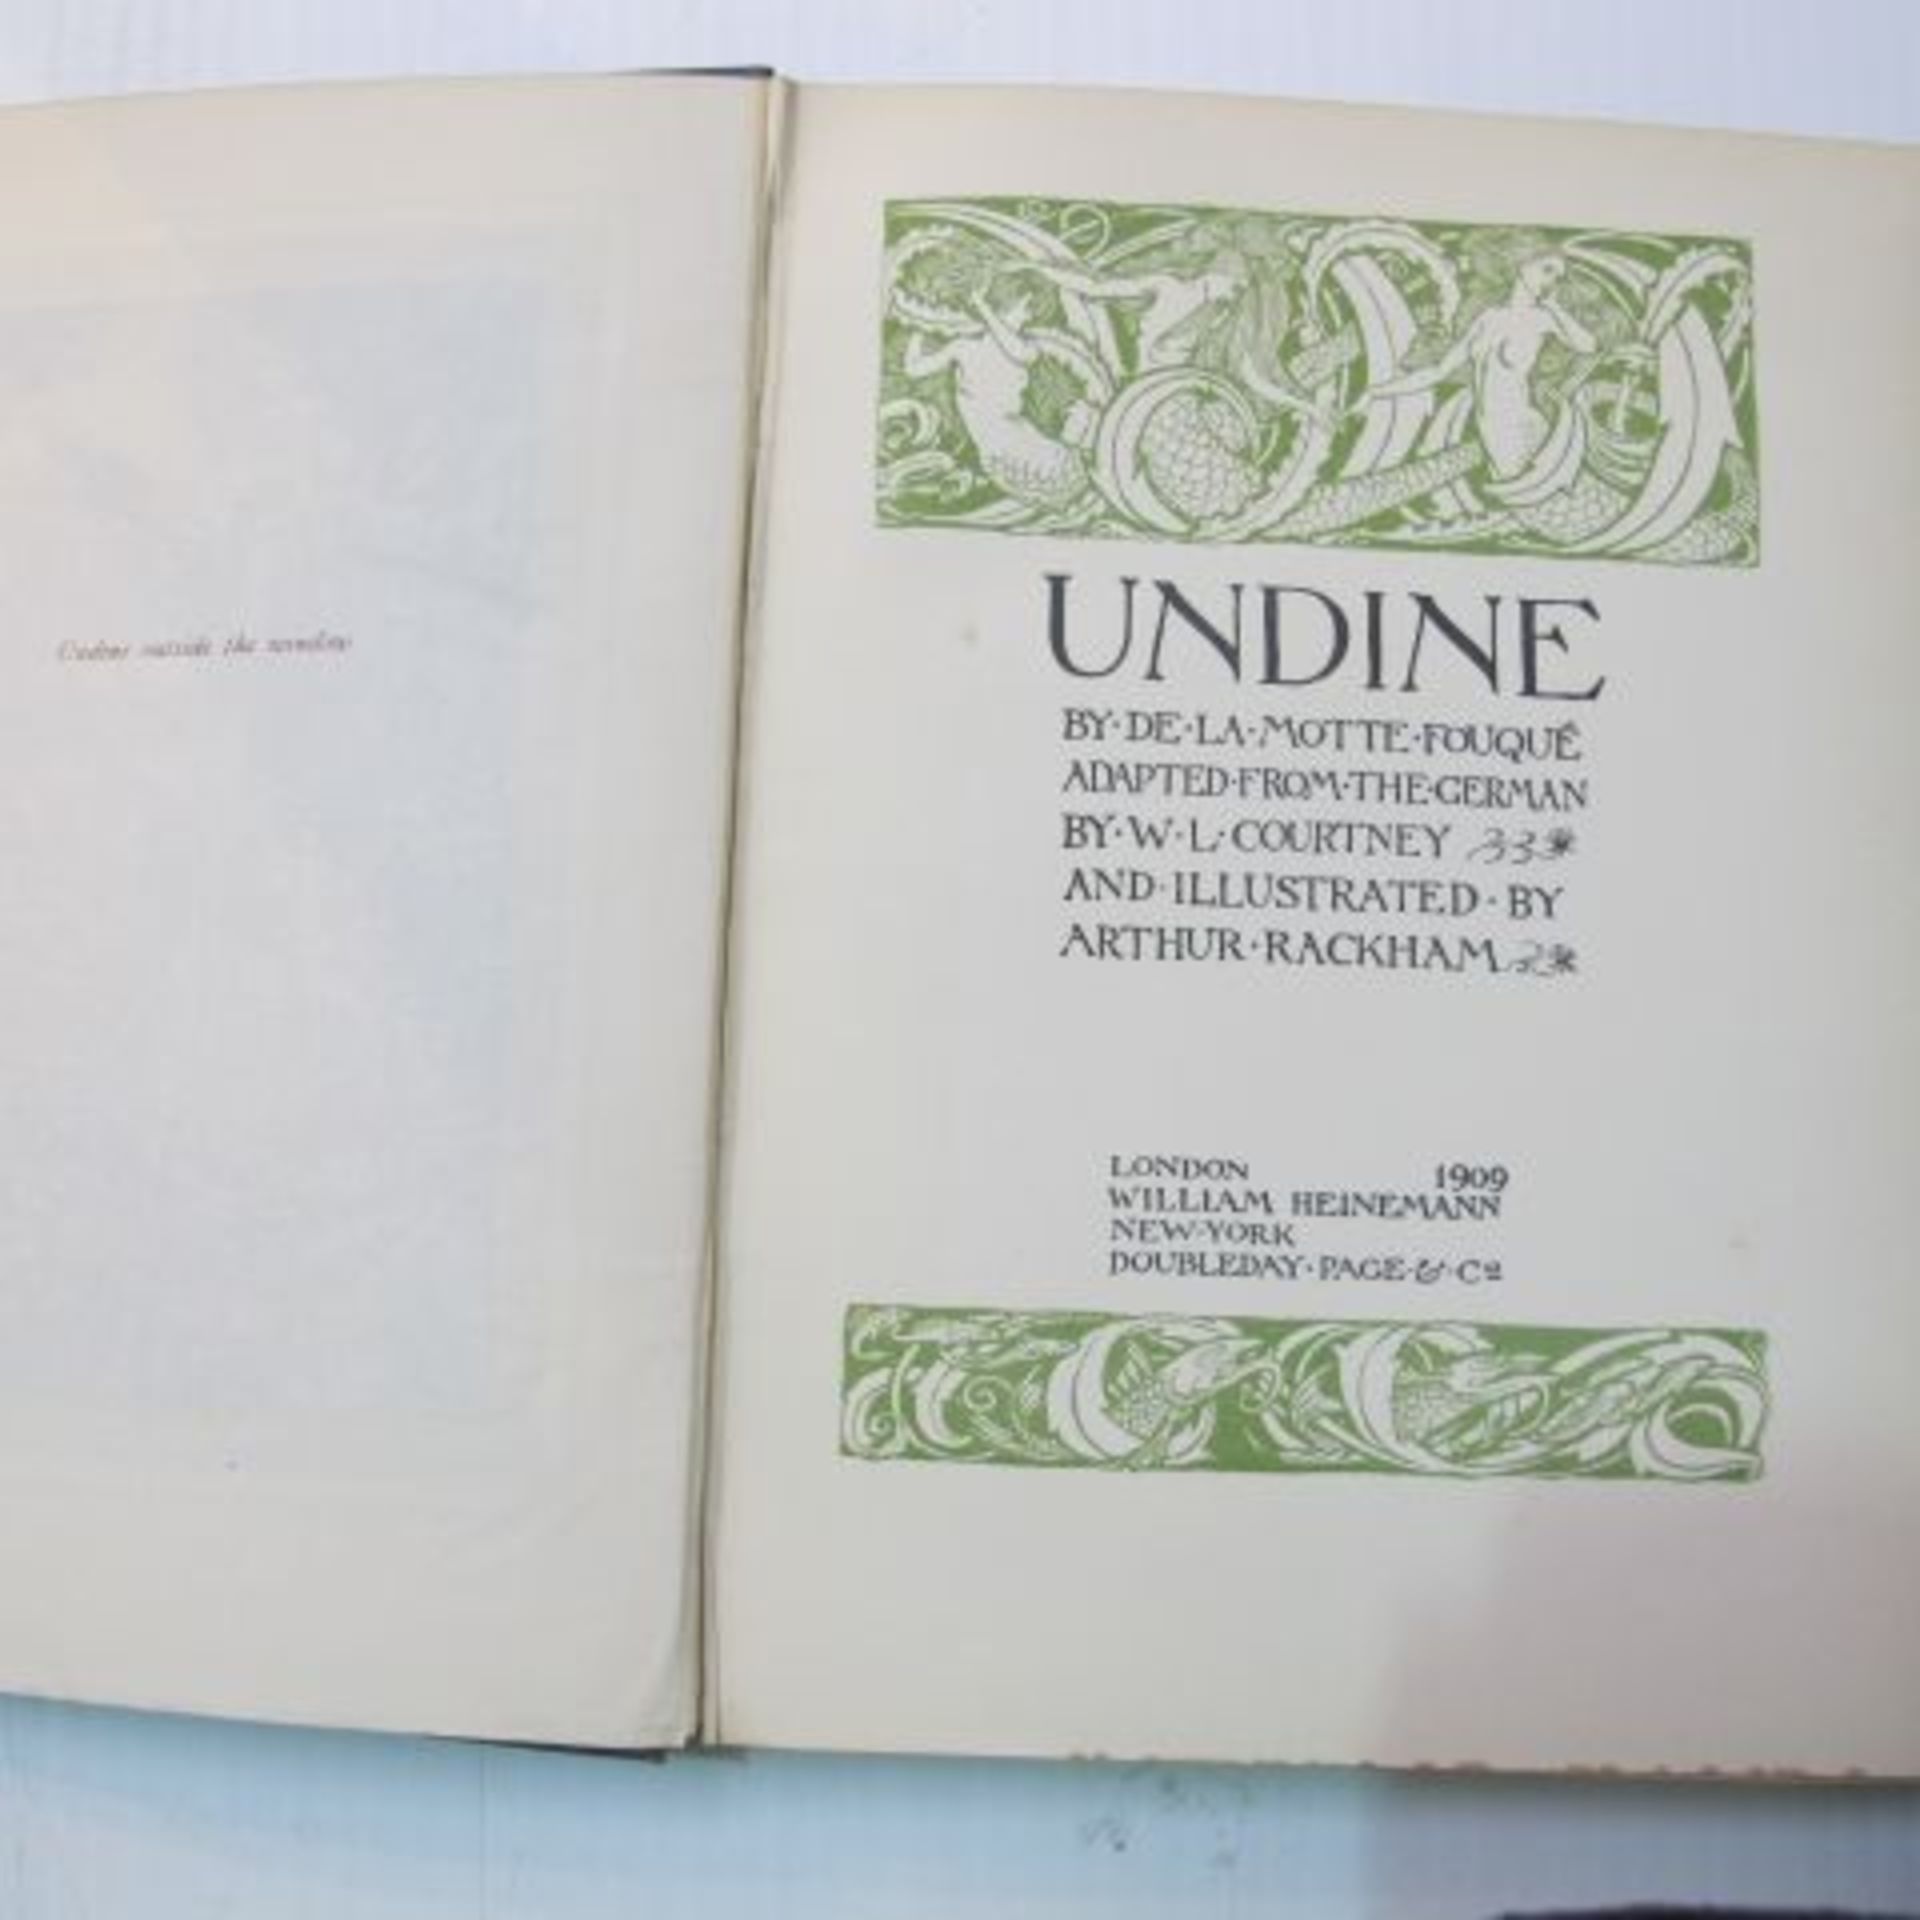 A hardback copy of Undine by De La Motte Fouqué adapted from the German by WL Courtney and - Image 2 of 3